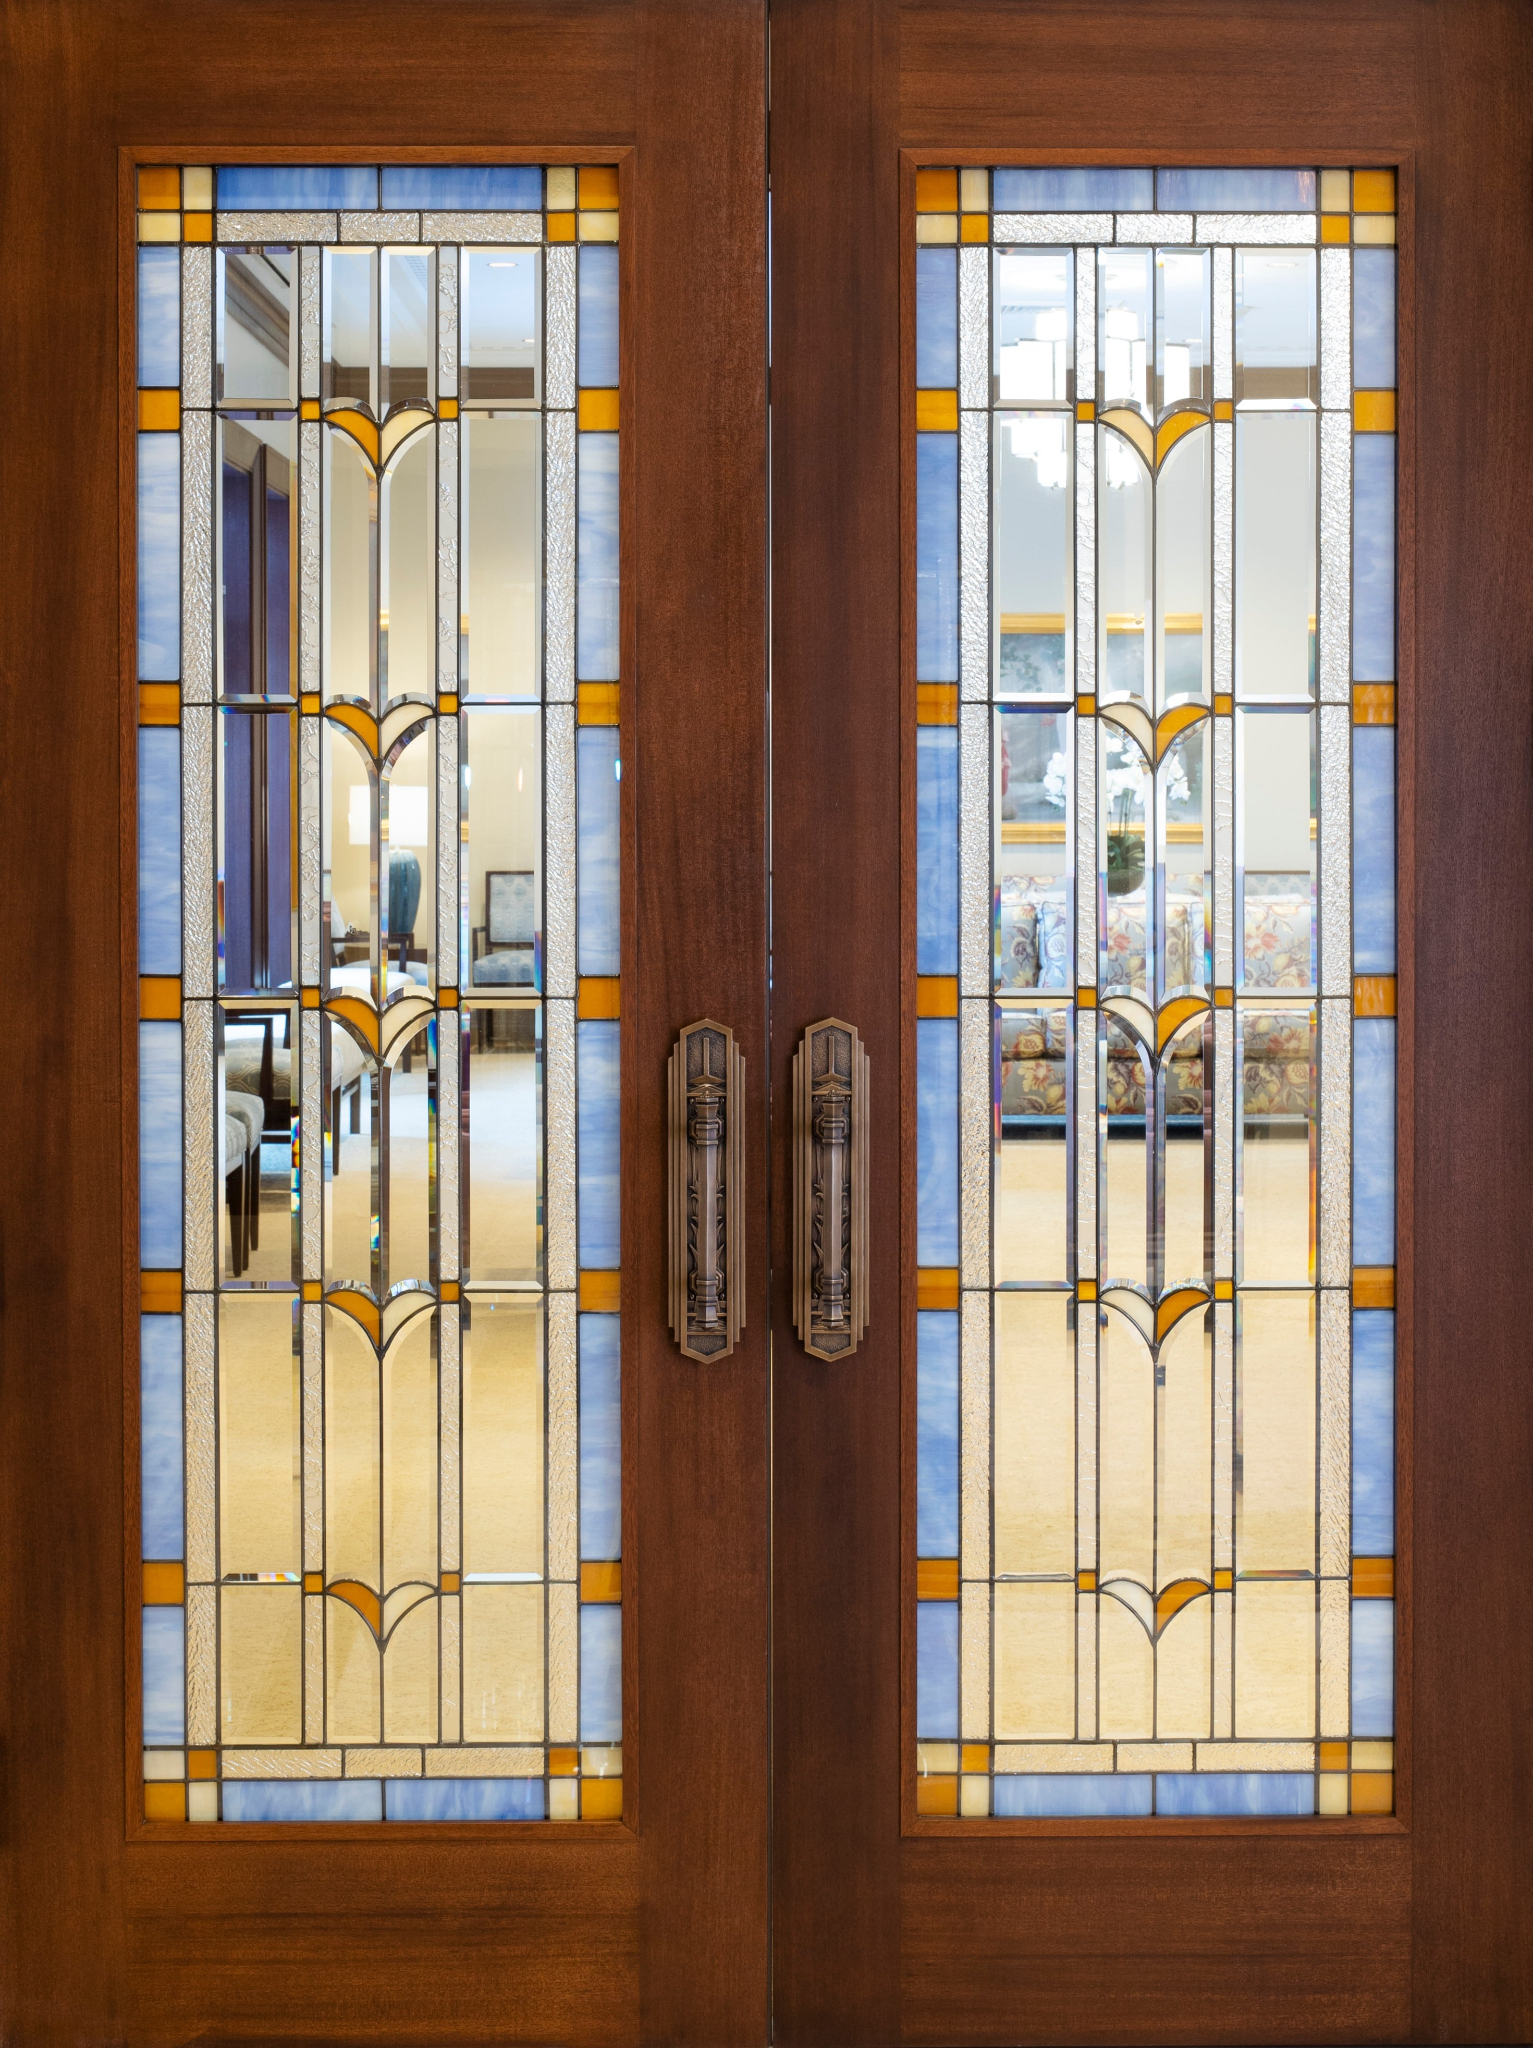 A close-up of two wooden doors with blue, orange and clear art glass in the middle.